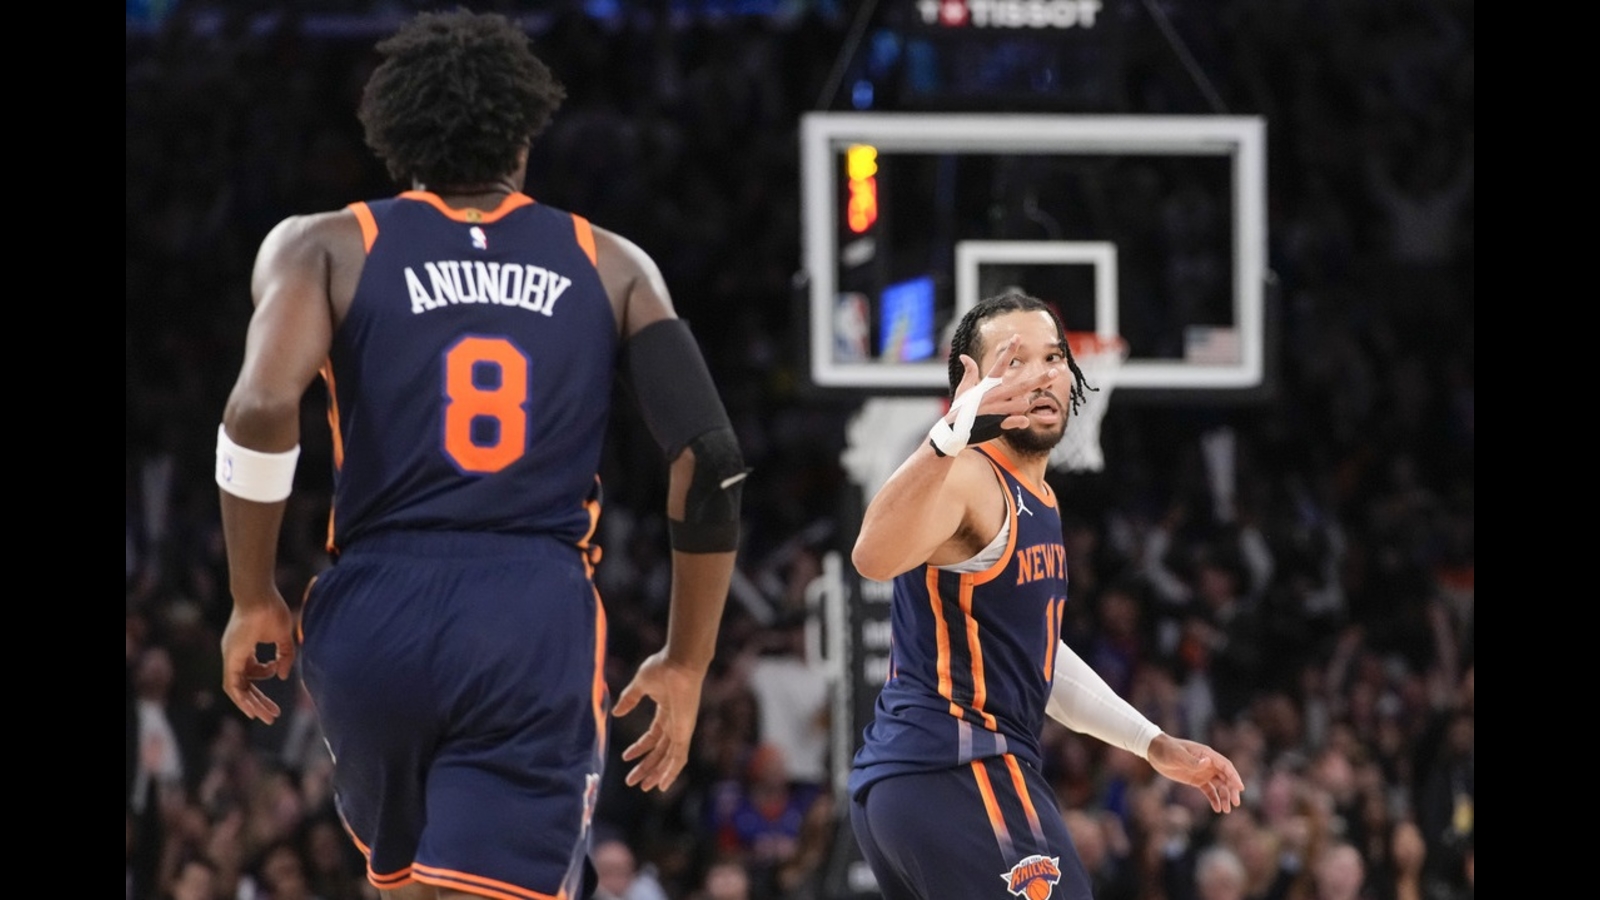 NBA Playoffs: The New York Knicks look to close out the Philadelphia 76ers at Madison Square Garden in their game 5 match up